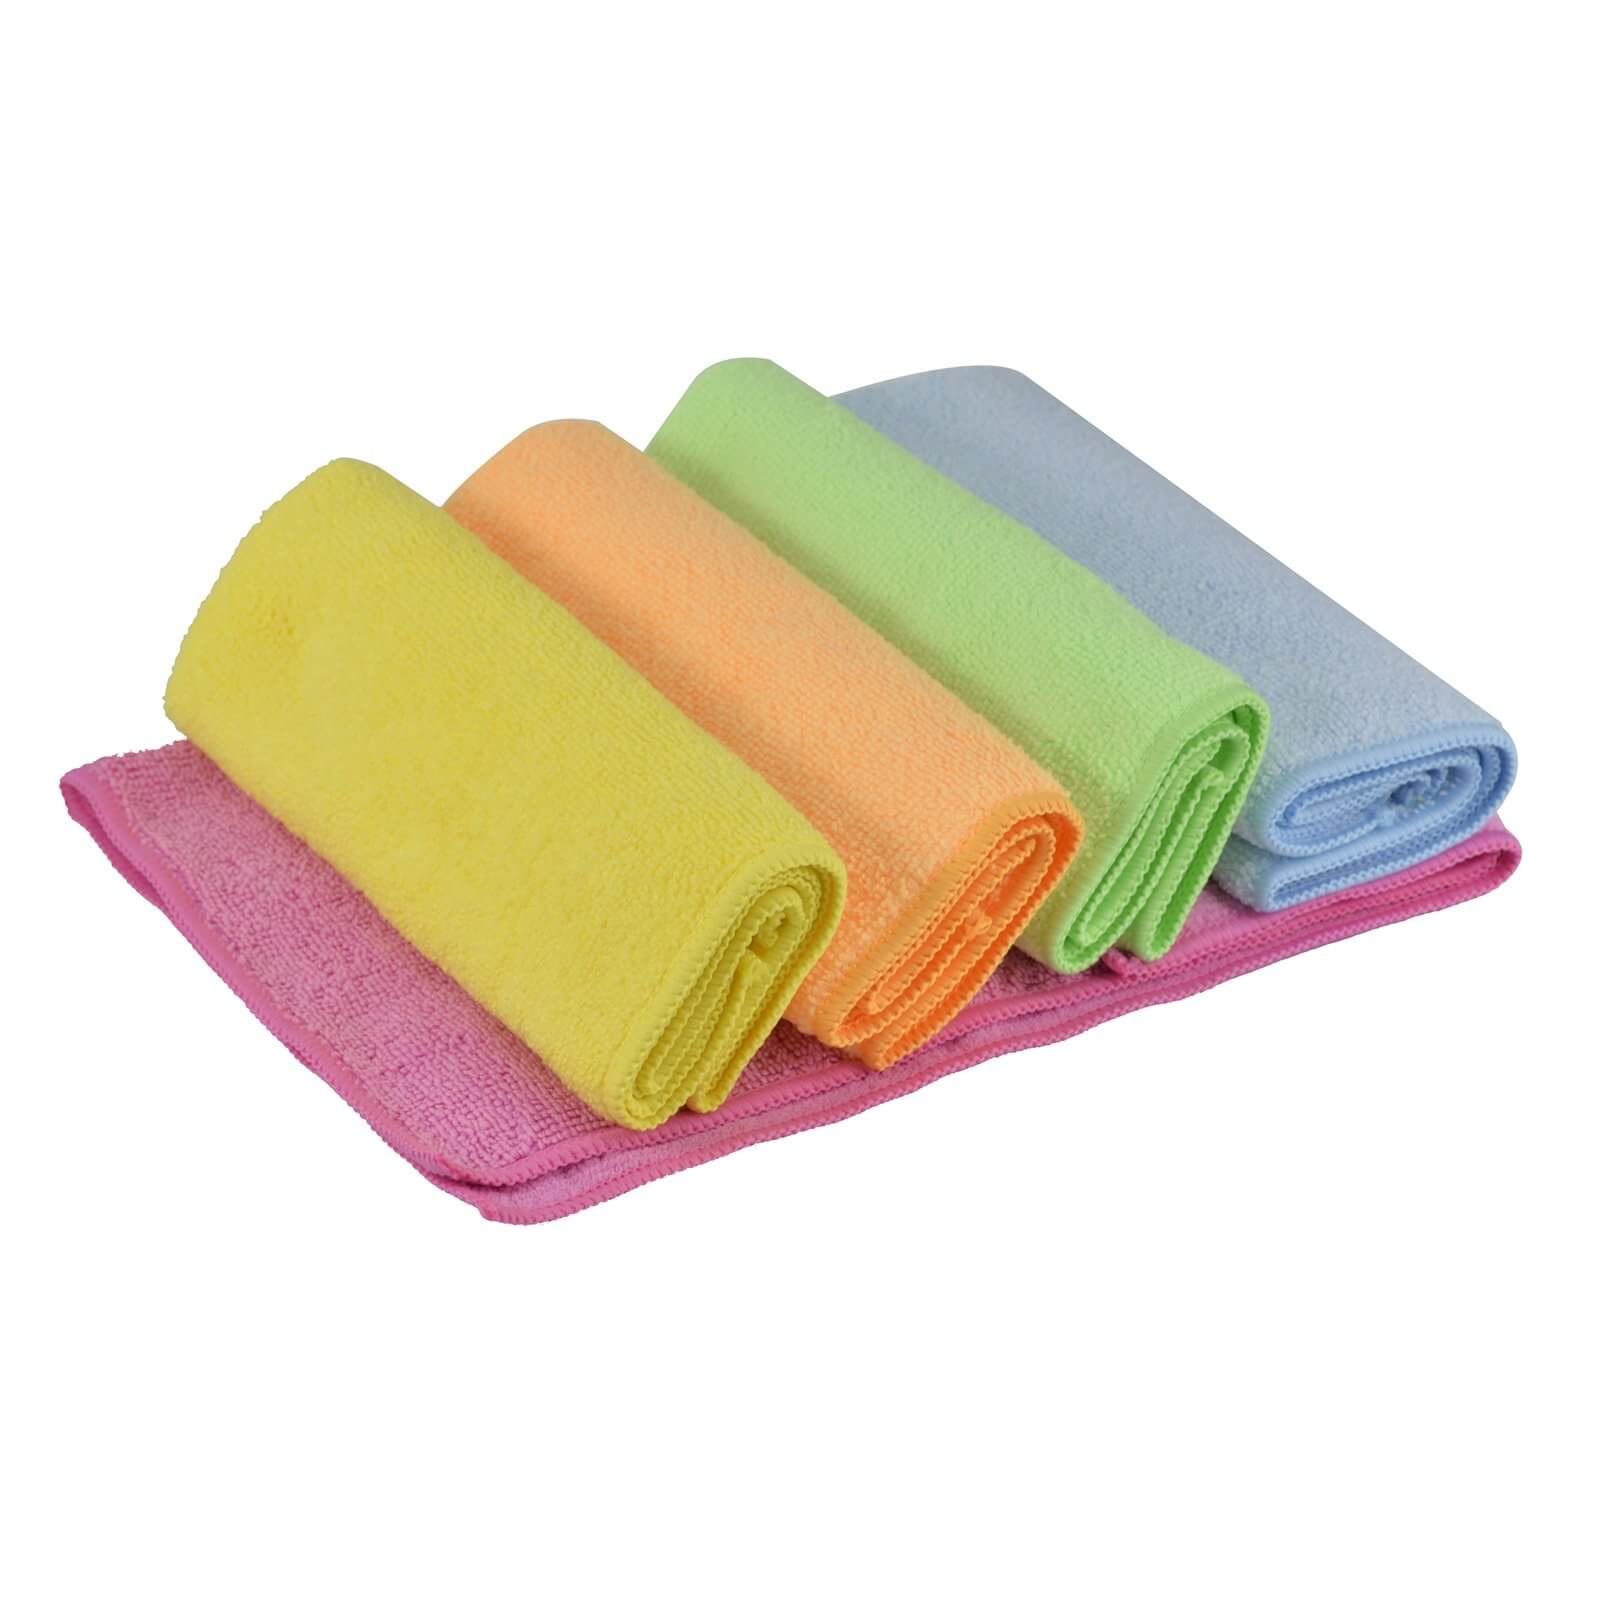 5 pack of Microfibre cloths